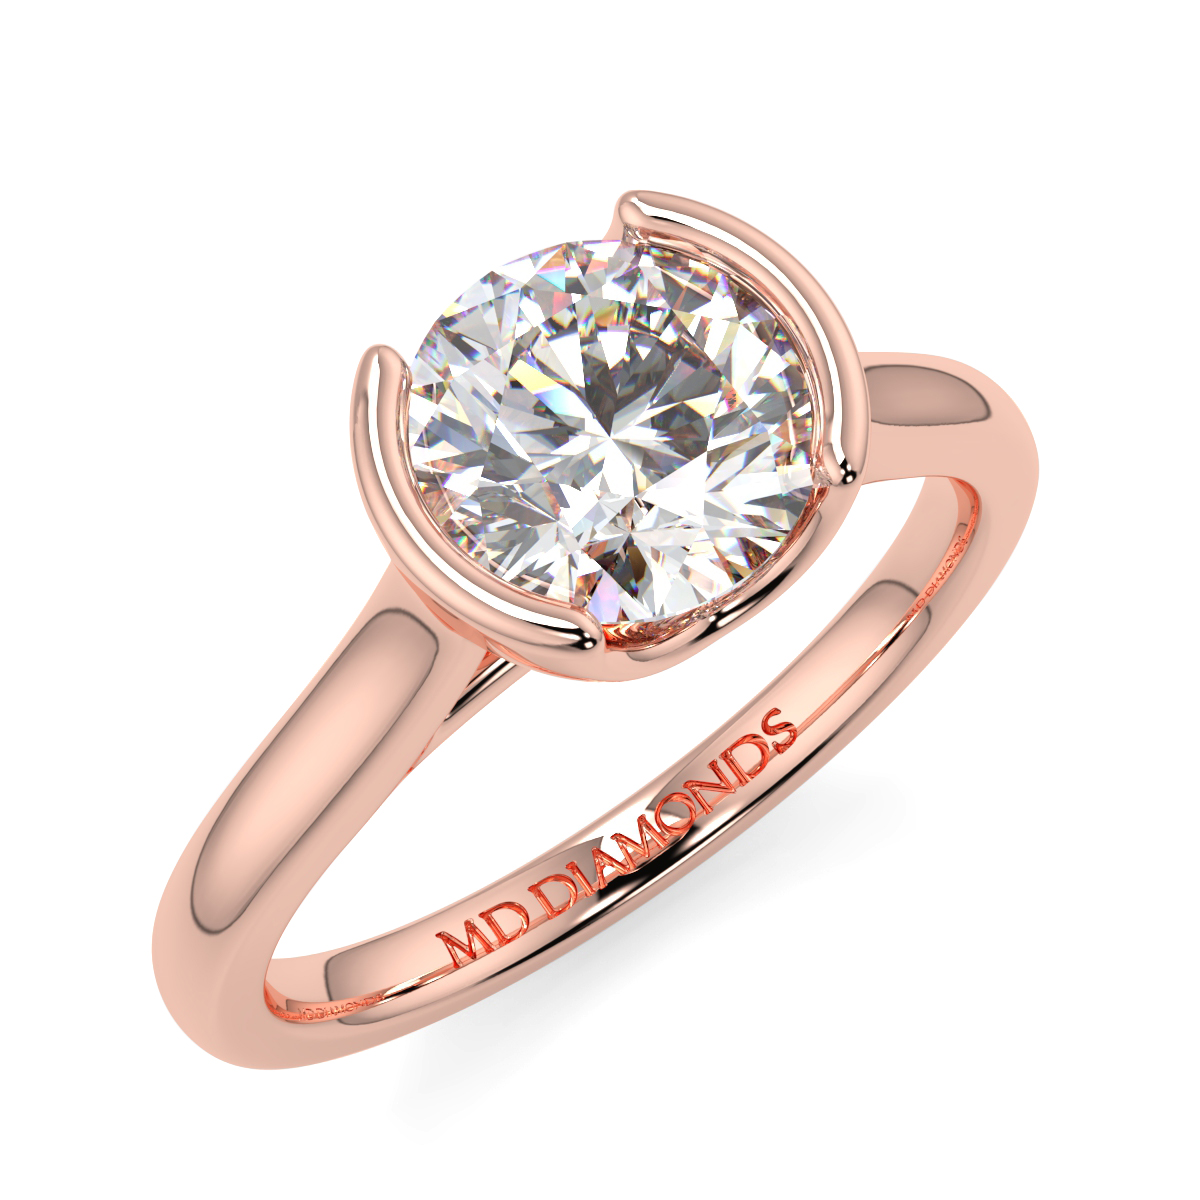 Round Half Rubover Solitaire Ring